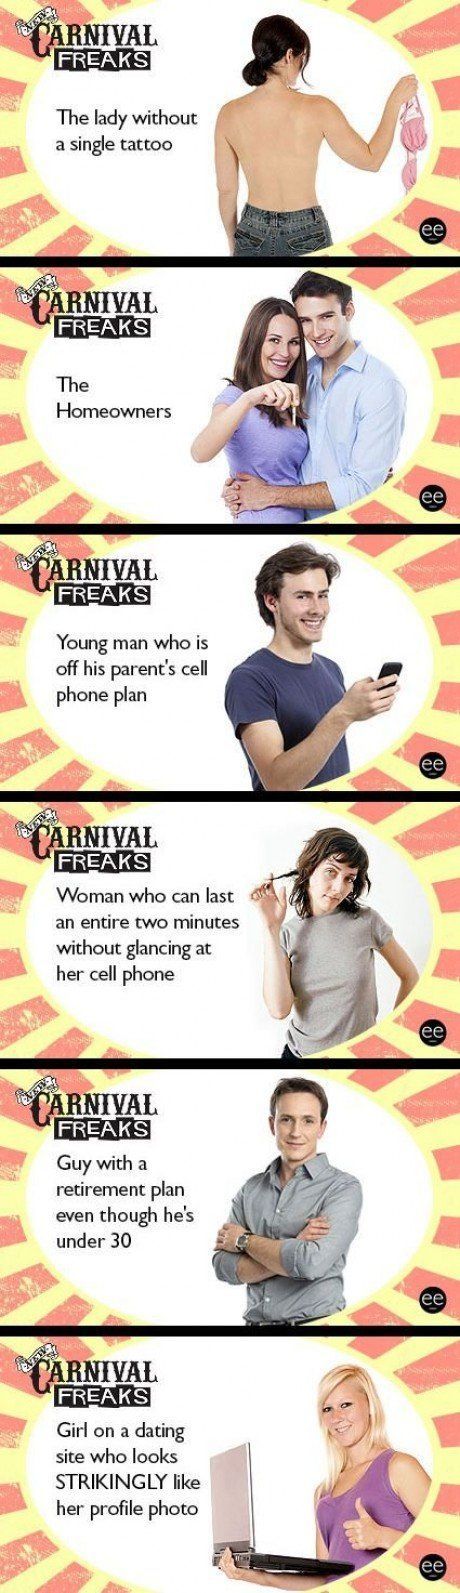 funny memes - fun pics - guitar center memez - Carnival Freaks The lady without a single tattoo ee Carnival Freaks The Homeowners ee Carnival Freaks Young man who is off his parent's cell phone plan ee Carnival Freaks Woman who can last an entire two minu